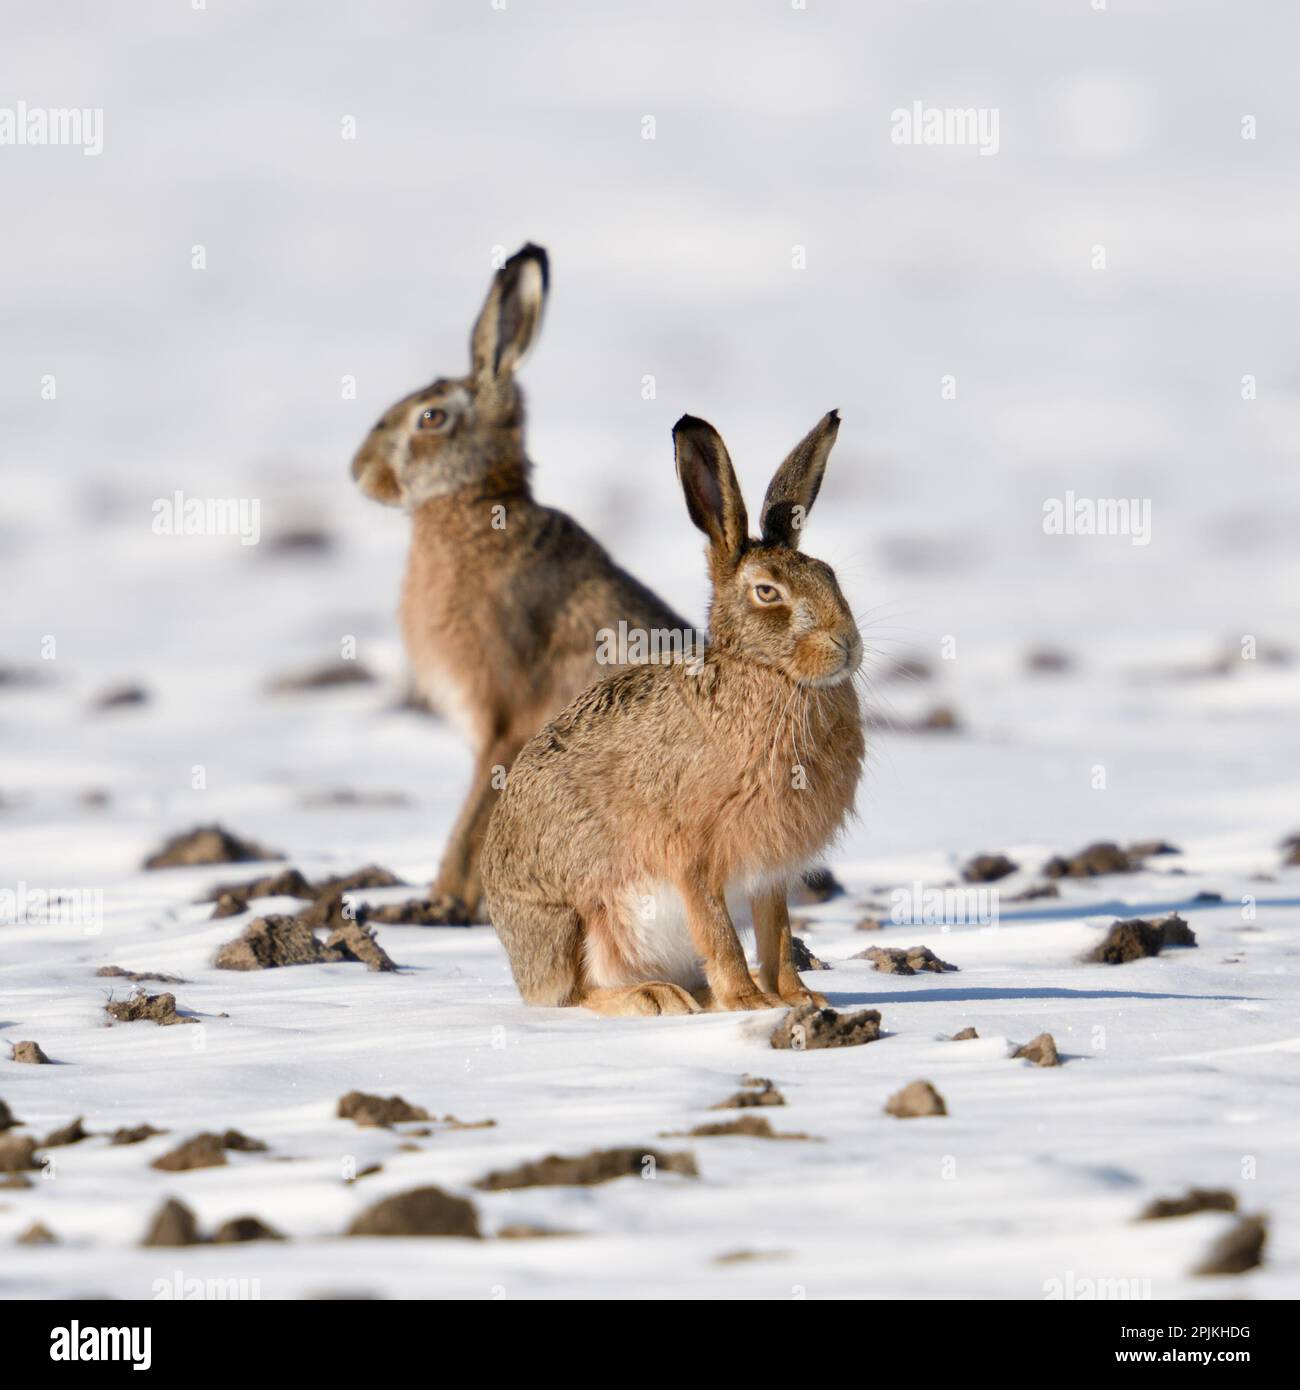 Winter hares... European hare ( Lepus europaeus ), two hares on a snowy field Stock Photo